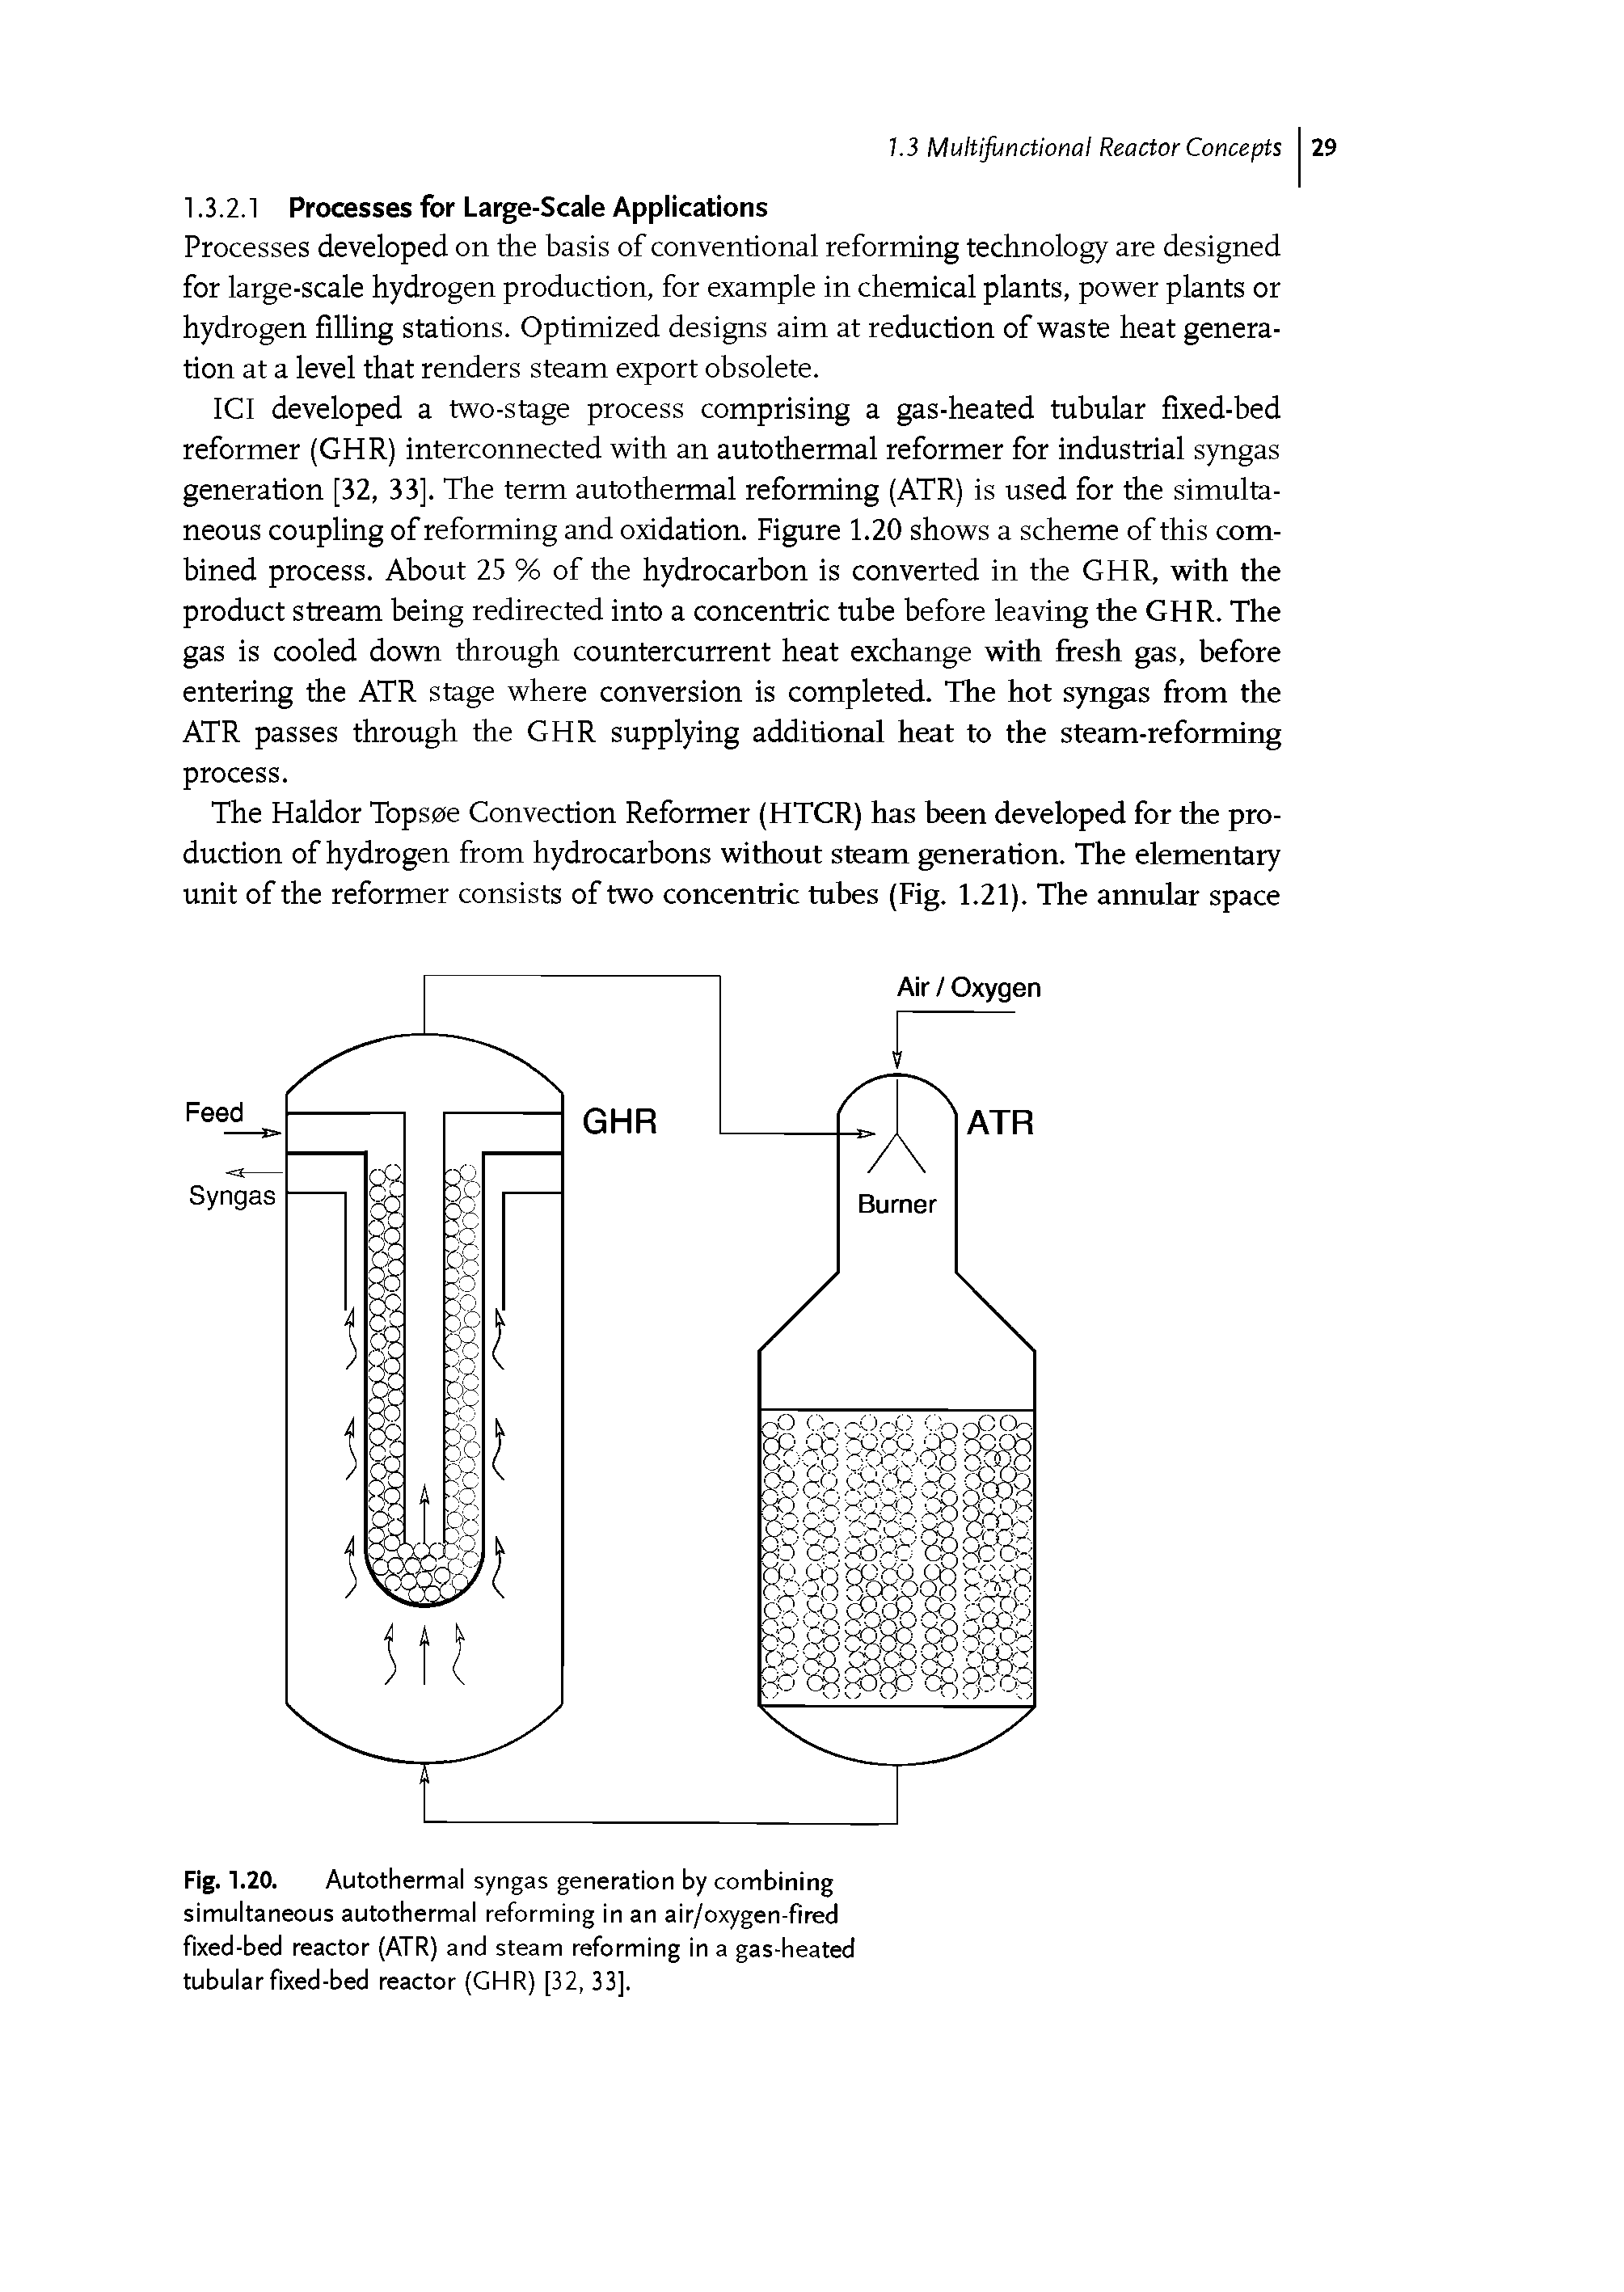 Fig. 1.20. Autothermal syngas generation by combining simultaneous autothermal reforming in an air/oxygen-fired fixed-bed reactor (ATR) and steam reforming in a gas-heated tubular fixed-bed reactor (GHR) [32, 33].